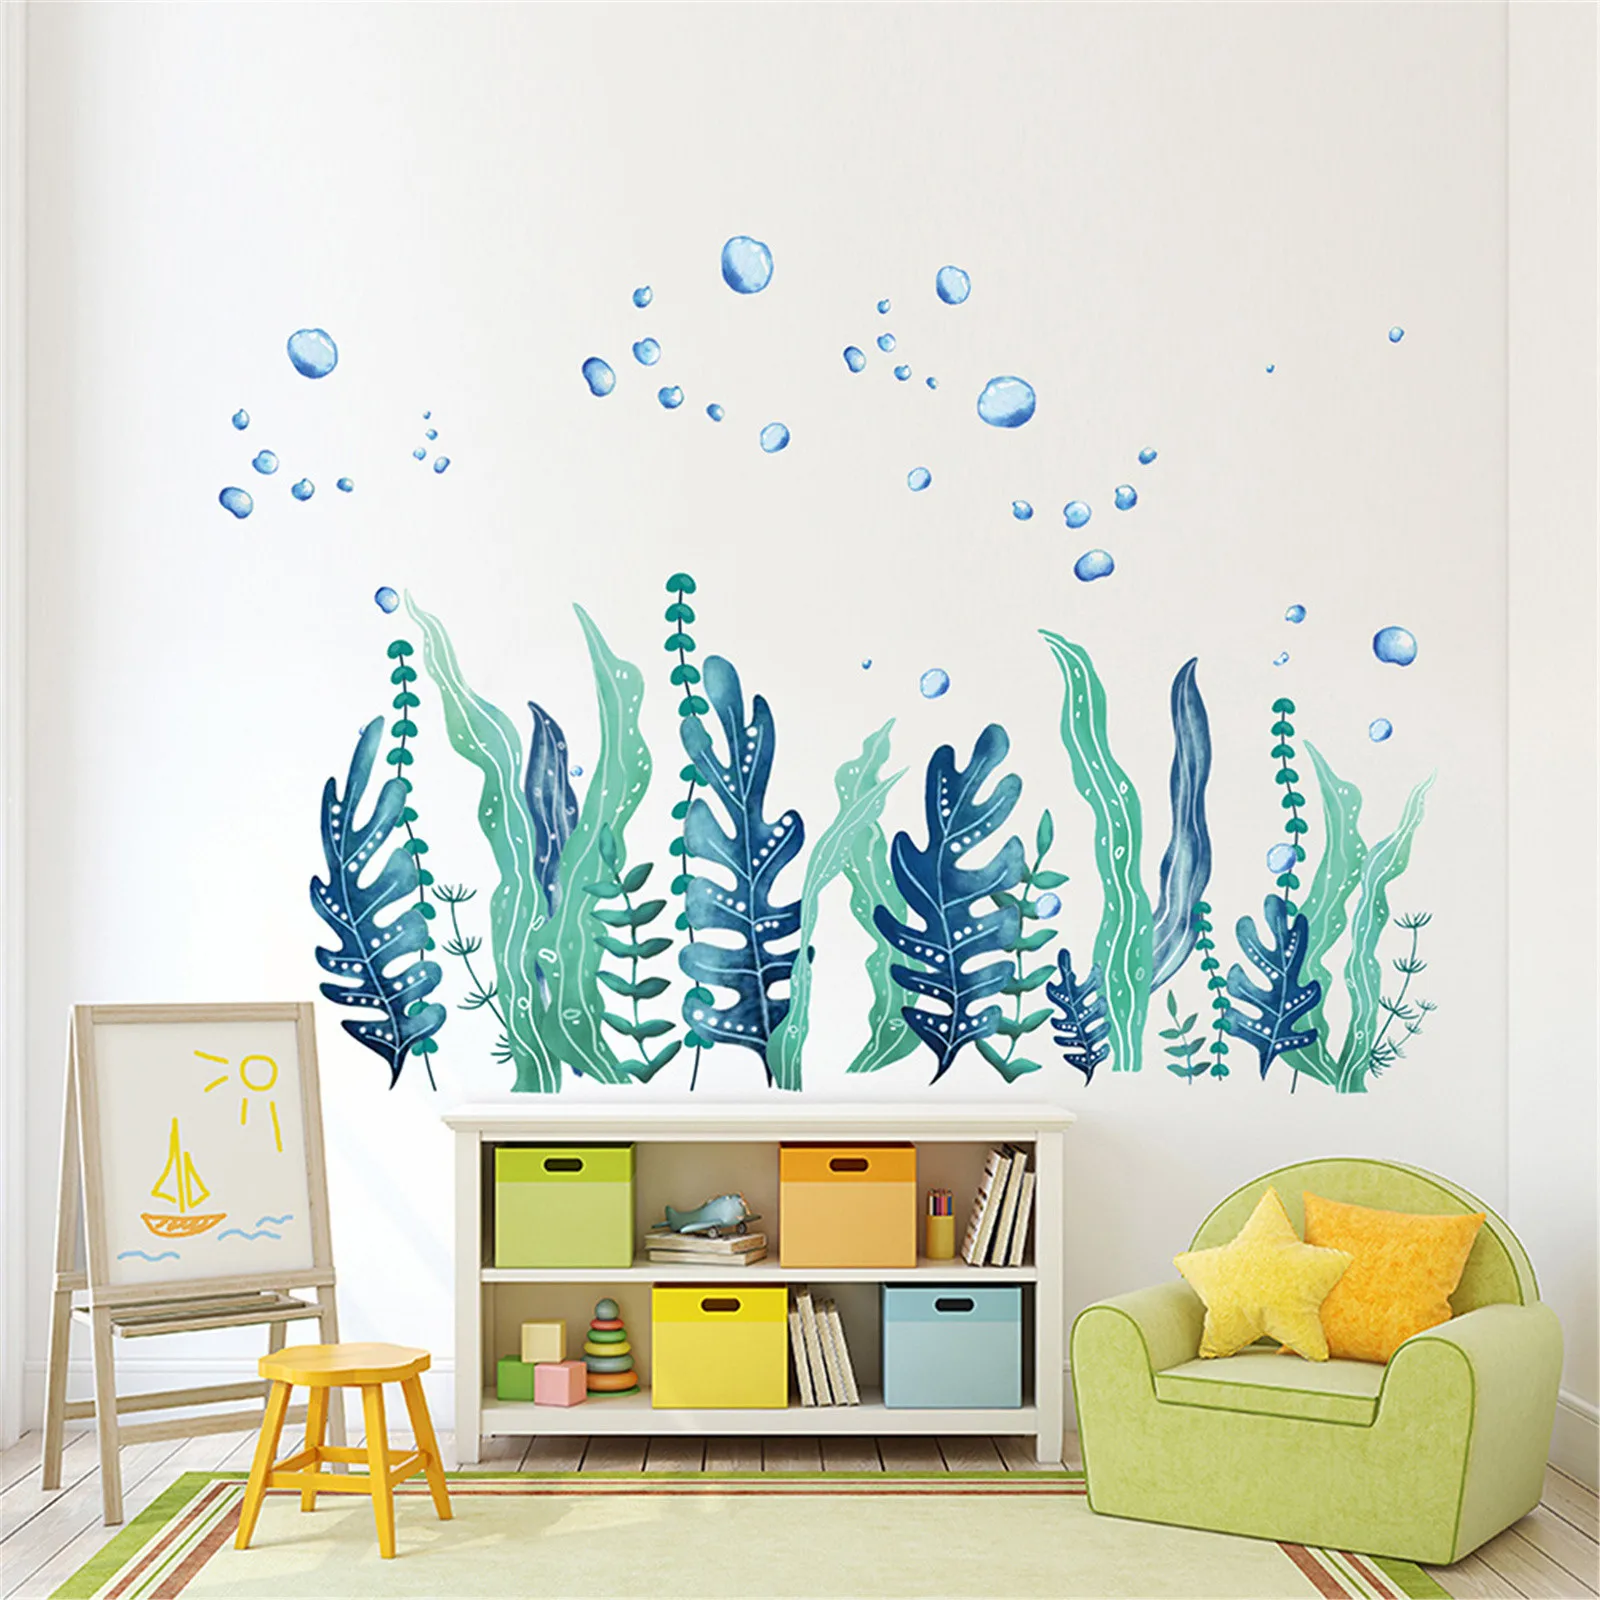 Amaonm Creative Cartoon Removable 3D Under The Sea World Nature Scenery Wall Stickers Ocean Grass Colorful Seaweed Baseboard Wall Decal for Wall Corner Nursery Room Bathroom Living Room Grass 